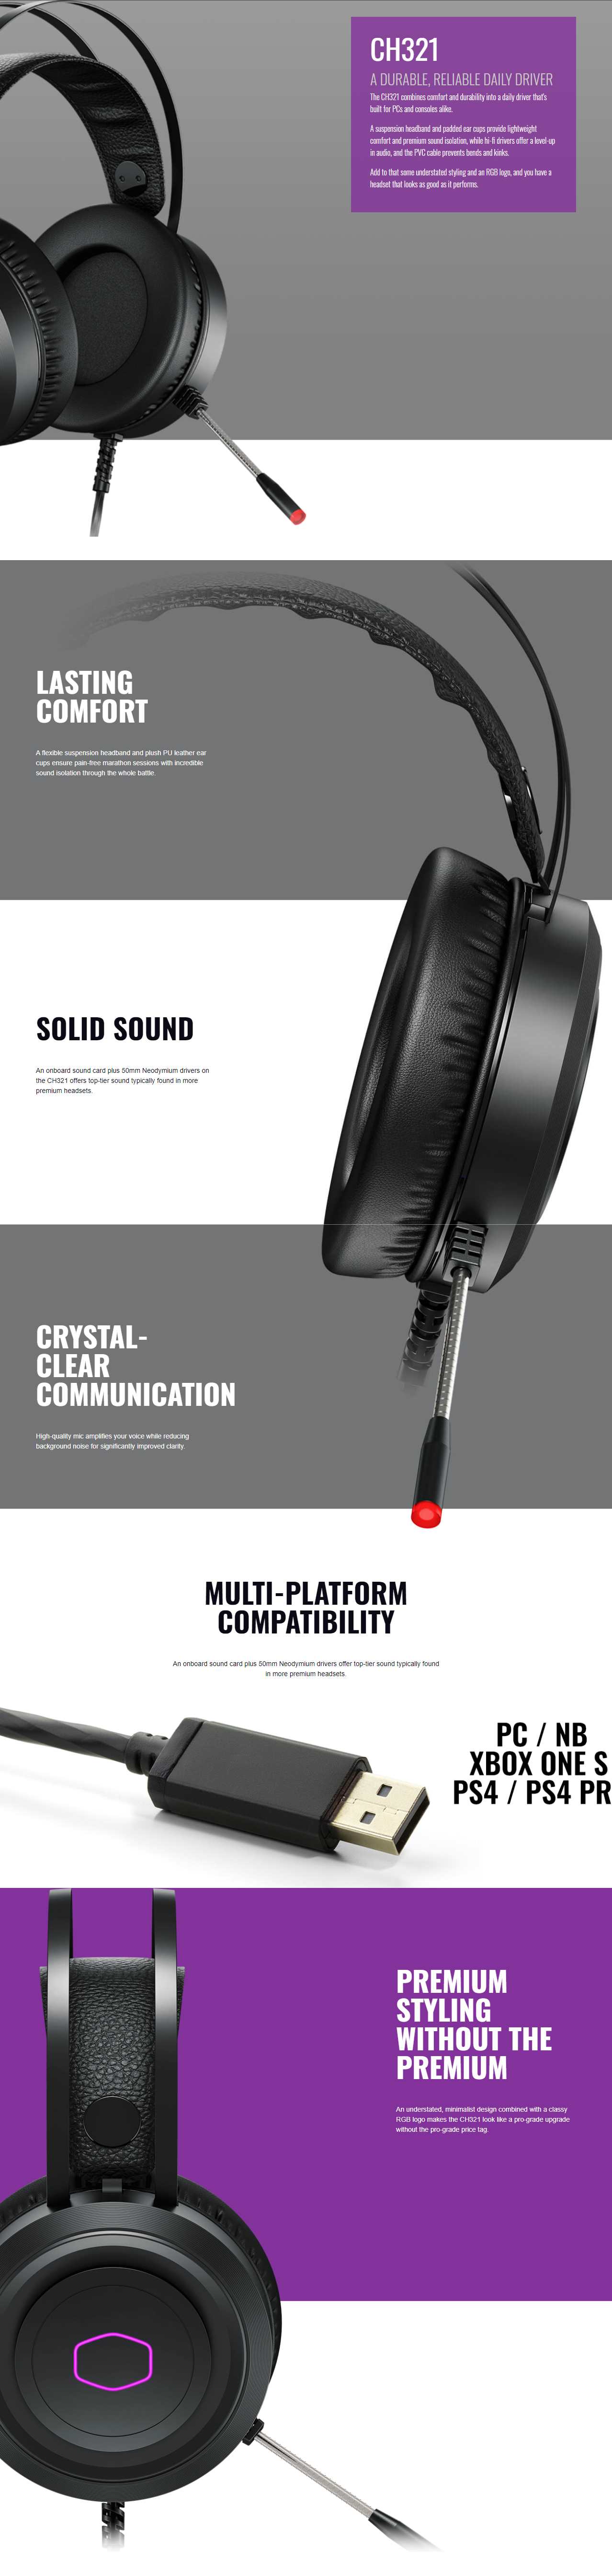 A large marketing image providing additional information about the product Cooler Master MasterPulse CH321 USB Gaming Headset - Additional alt info not provided